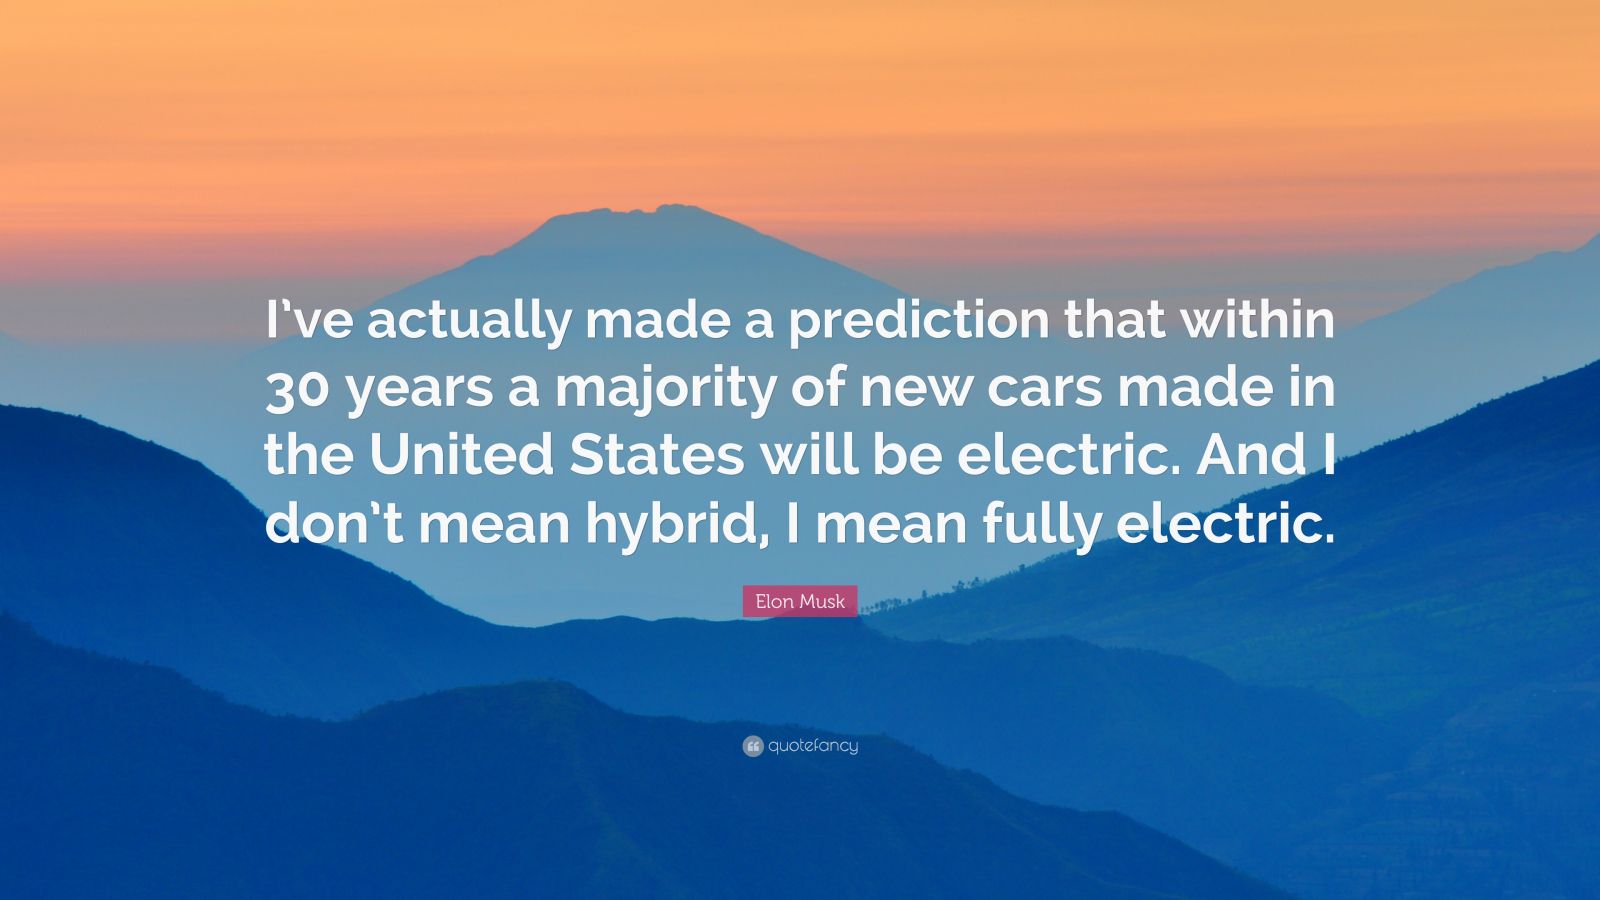 Elon Musk Quote “I’ve actually made a prediction that within 30 years